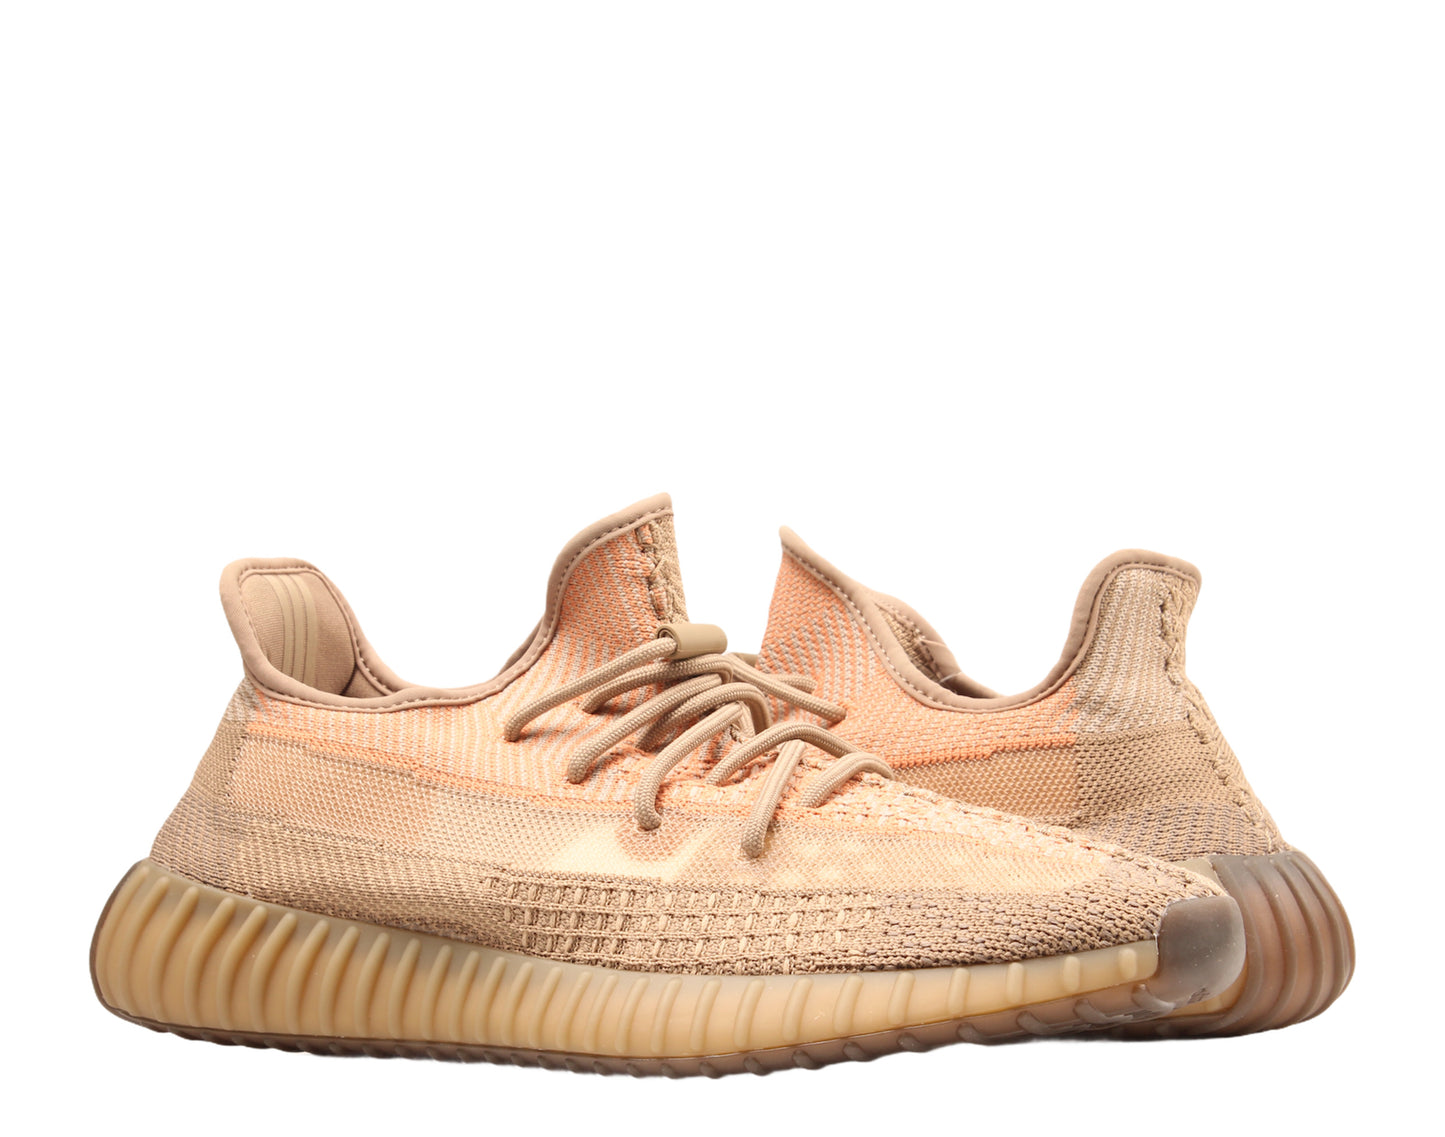 Adidas Yeezy Boost 350 V2 Men's Shoes